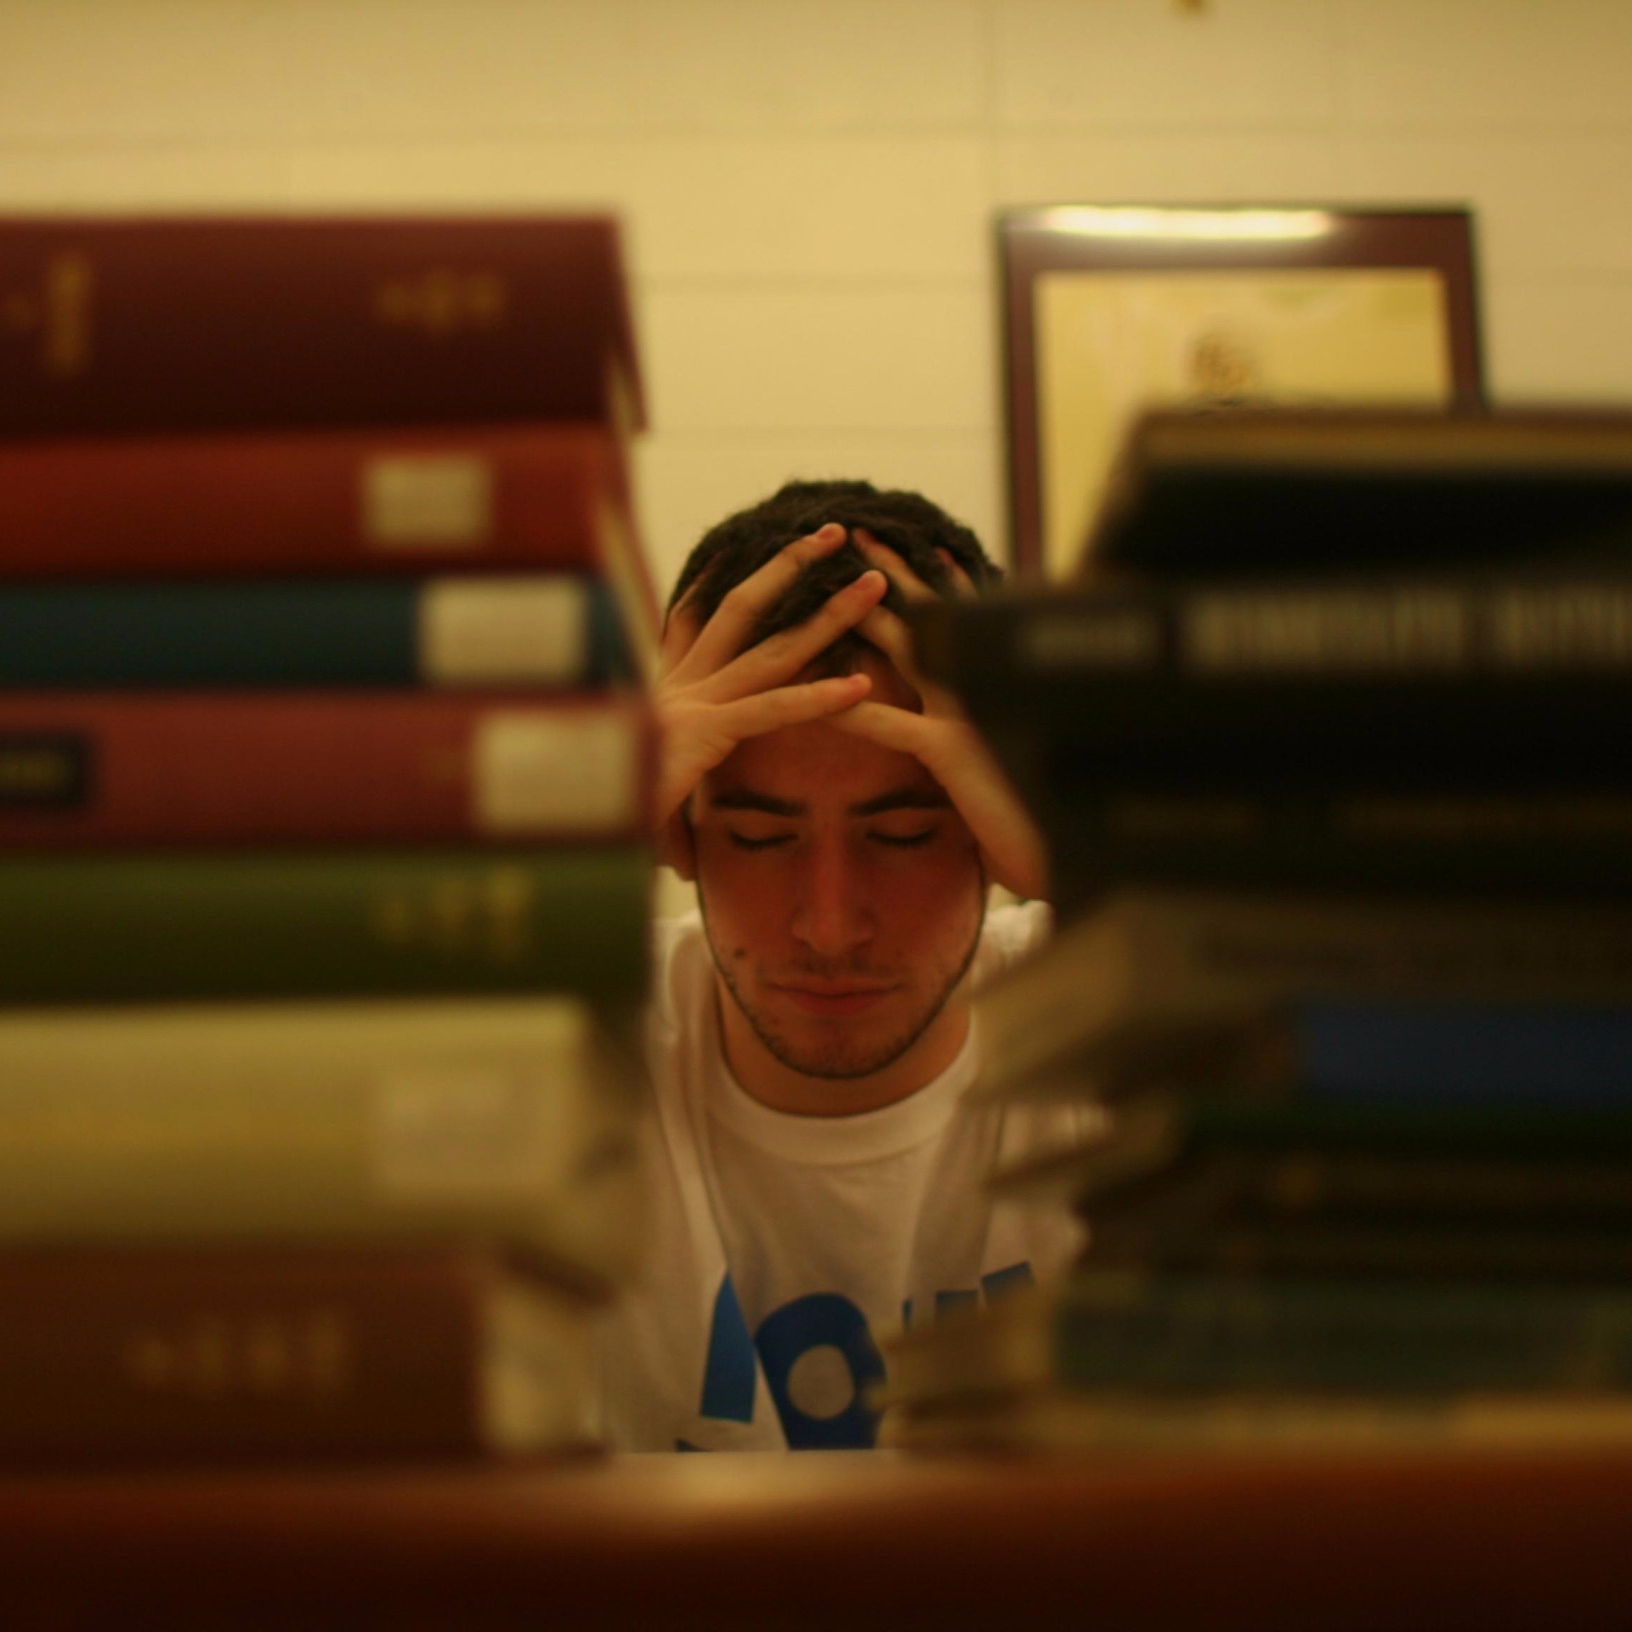 Students in college susceptible to more stress, depression